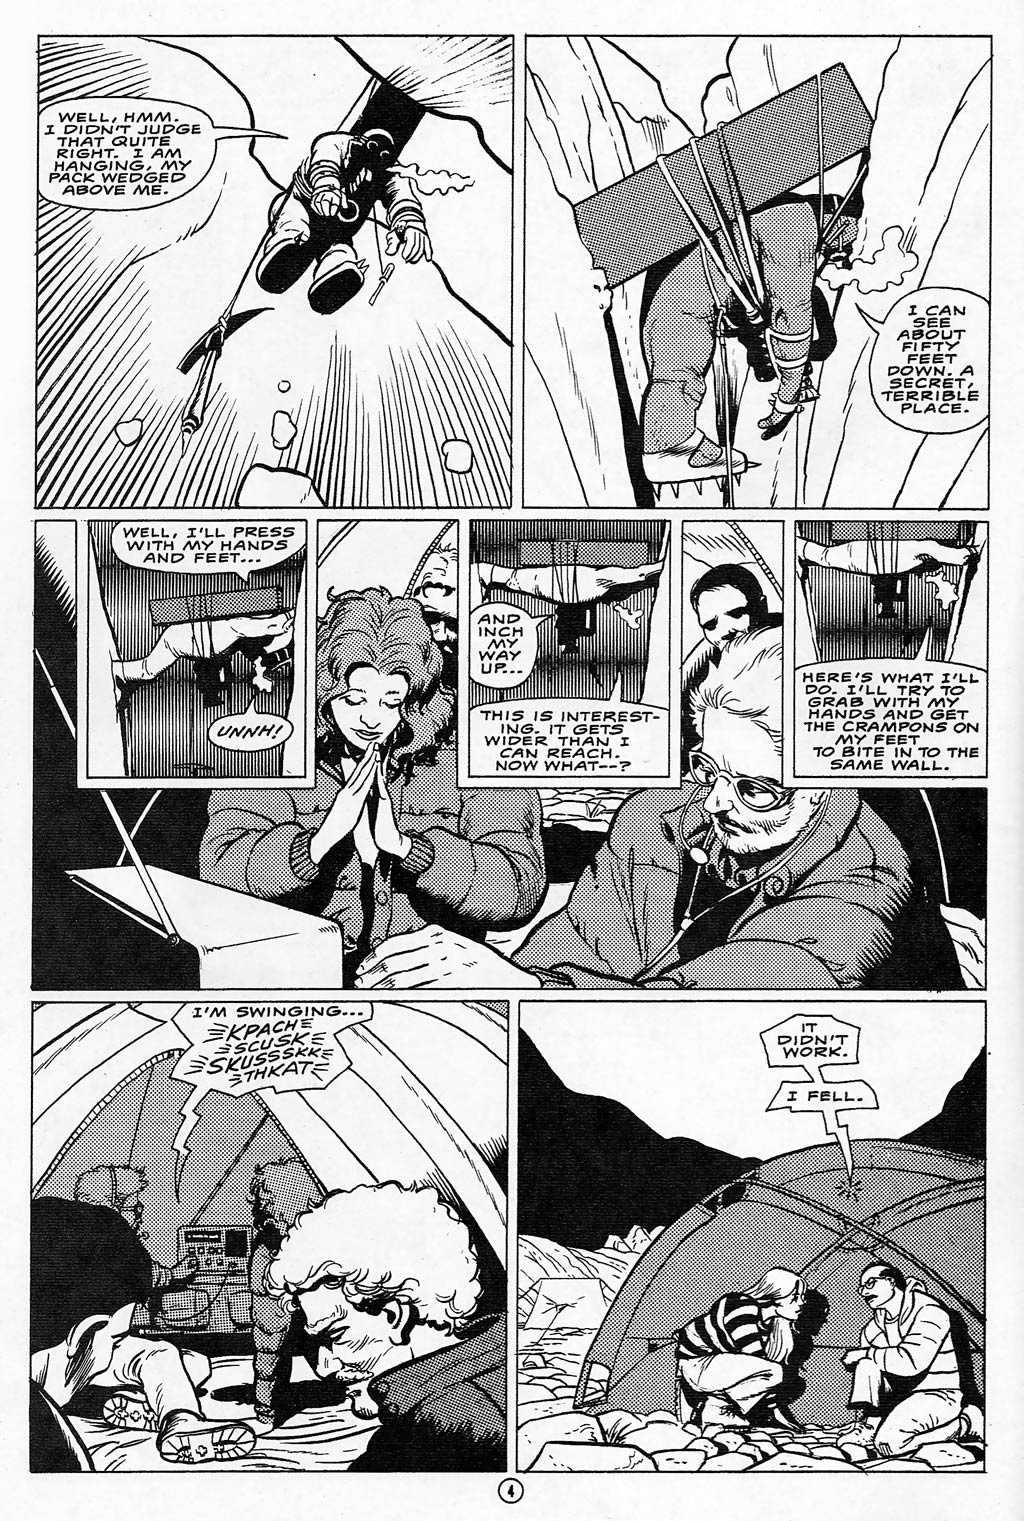 Concrete (1987) issue 9 - Page 6